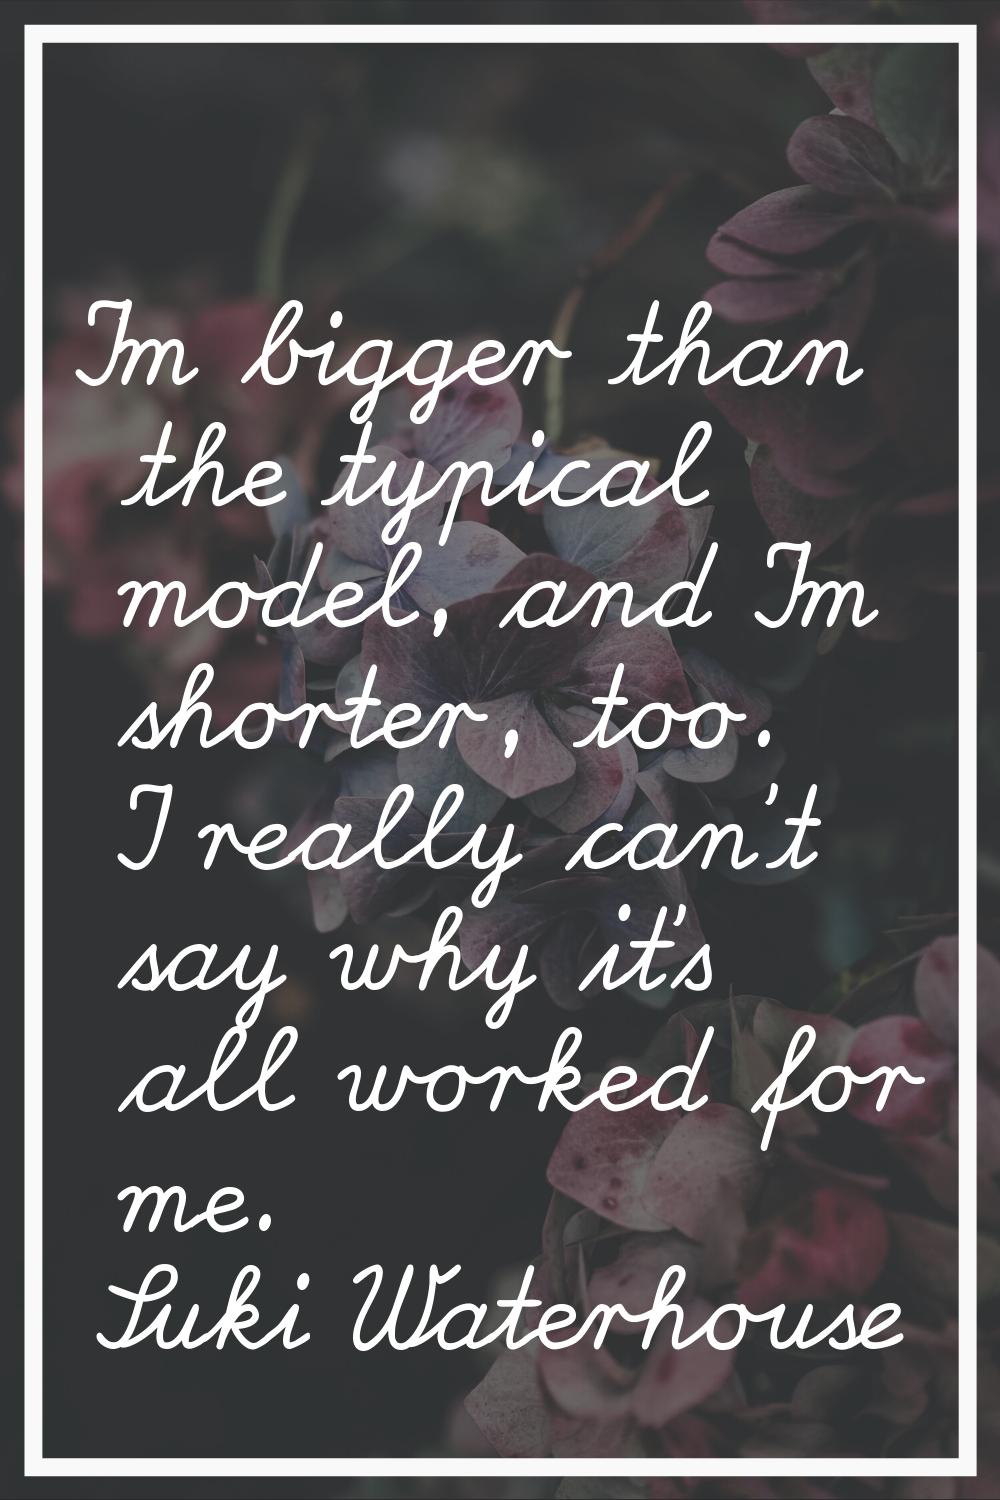 I'm bigger than the typical model, and I'm shorter, too. I really can't say why it's all worked for